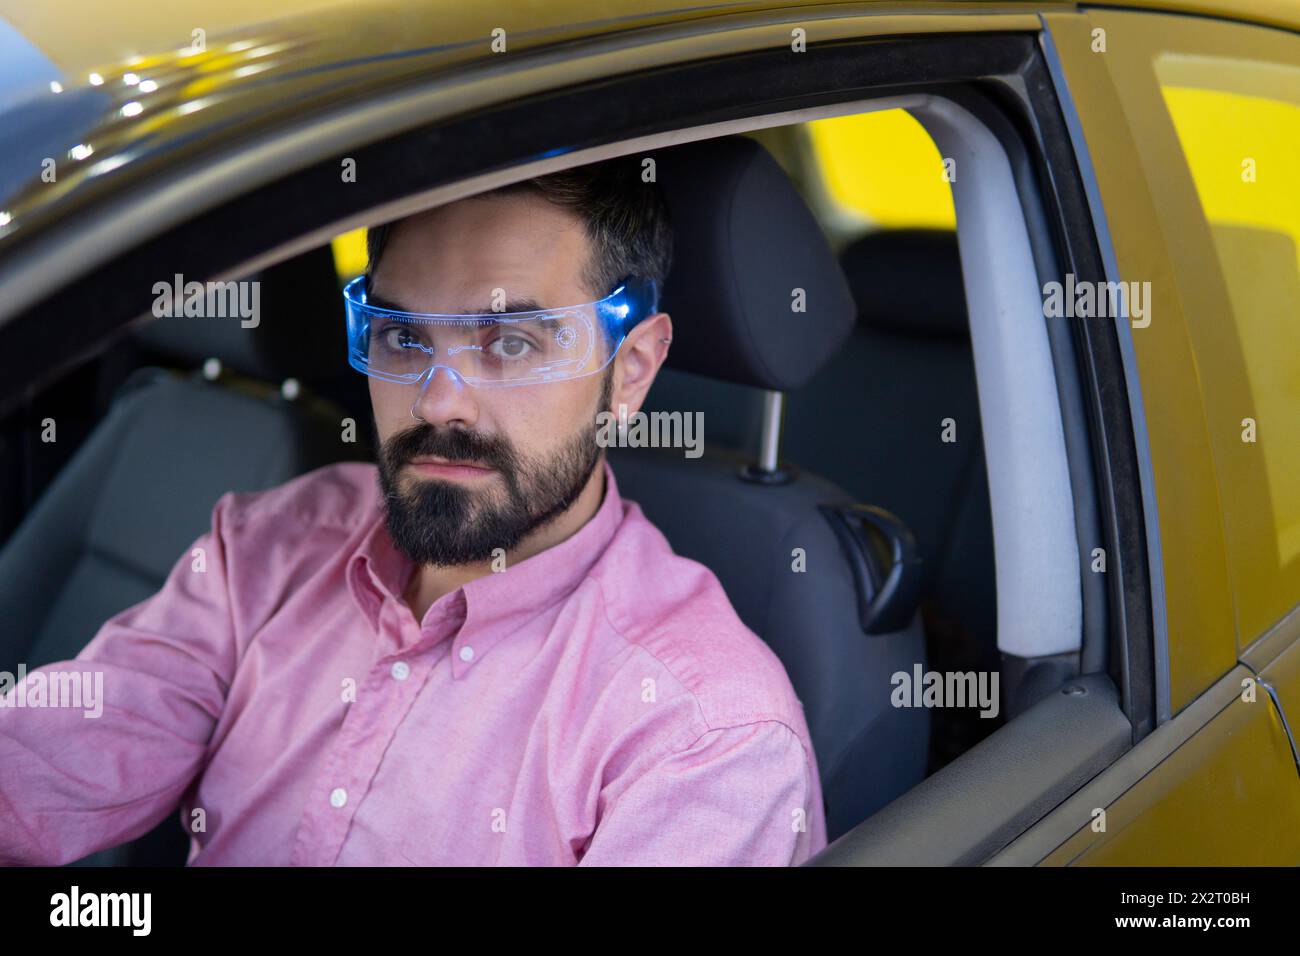 Man wearing smart glasses and sitting inside car Stock Photo